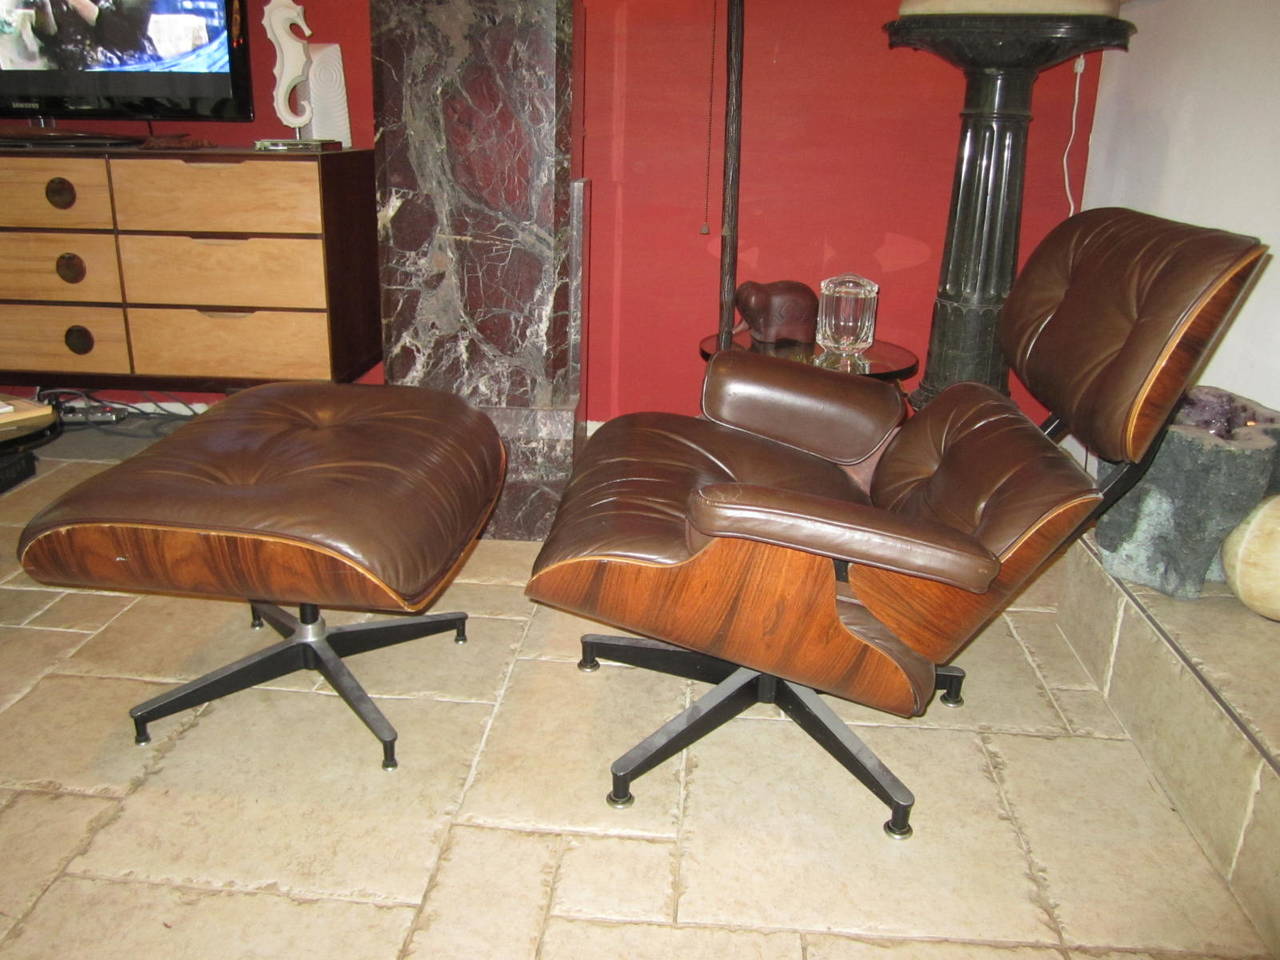 Vintage rosewood lounge chair and ottoman by Charles Eames. This all original example has a beautifully grained rosewood shell, is down filled and upholstered in it's original supple and stunning chocolate brown leather. This chair has wonderful